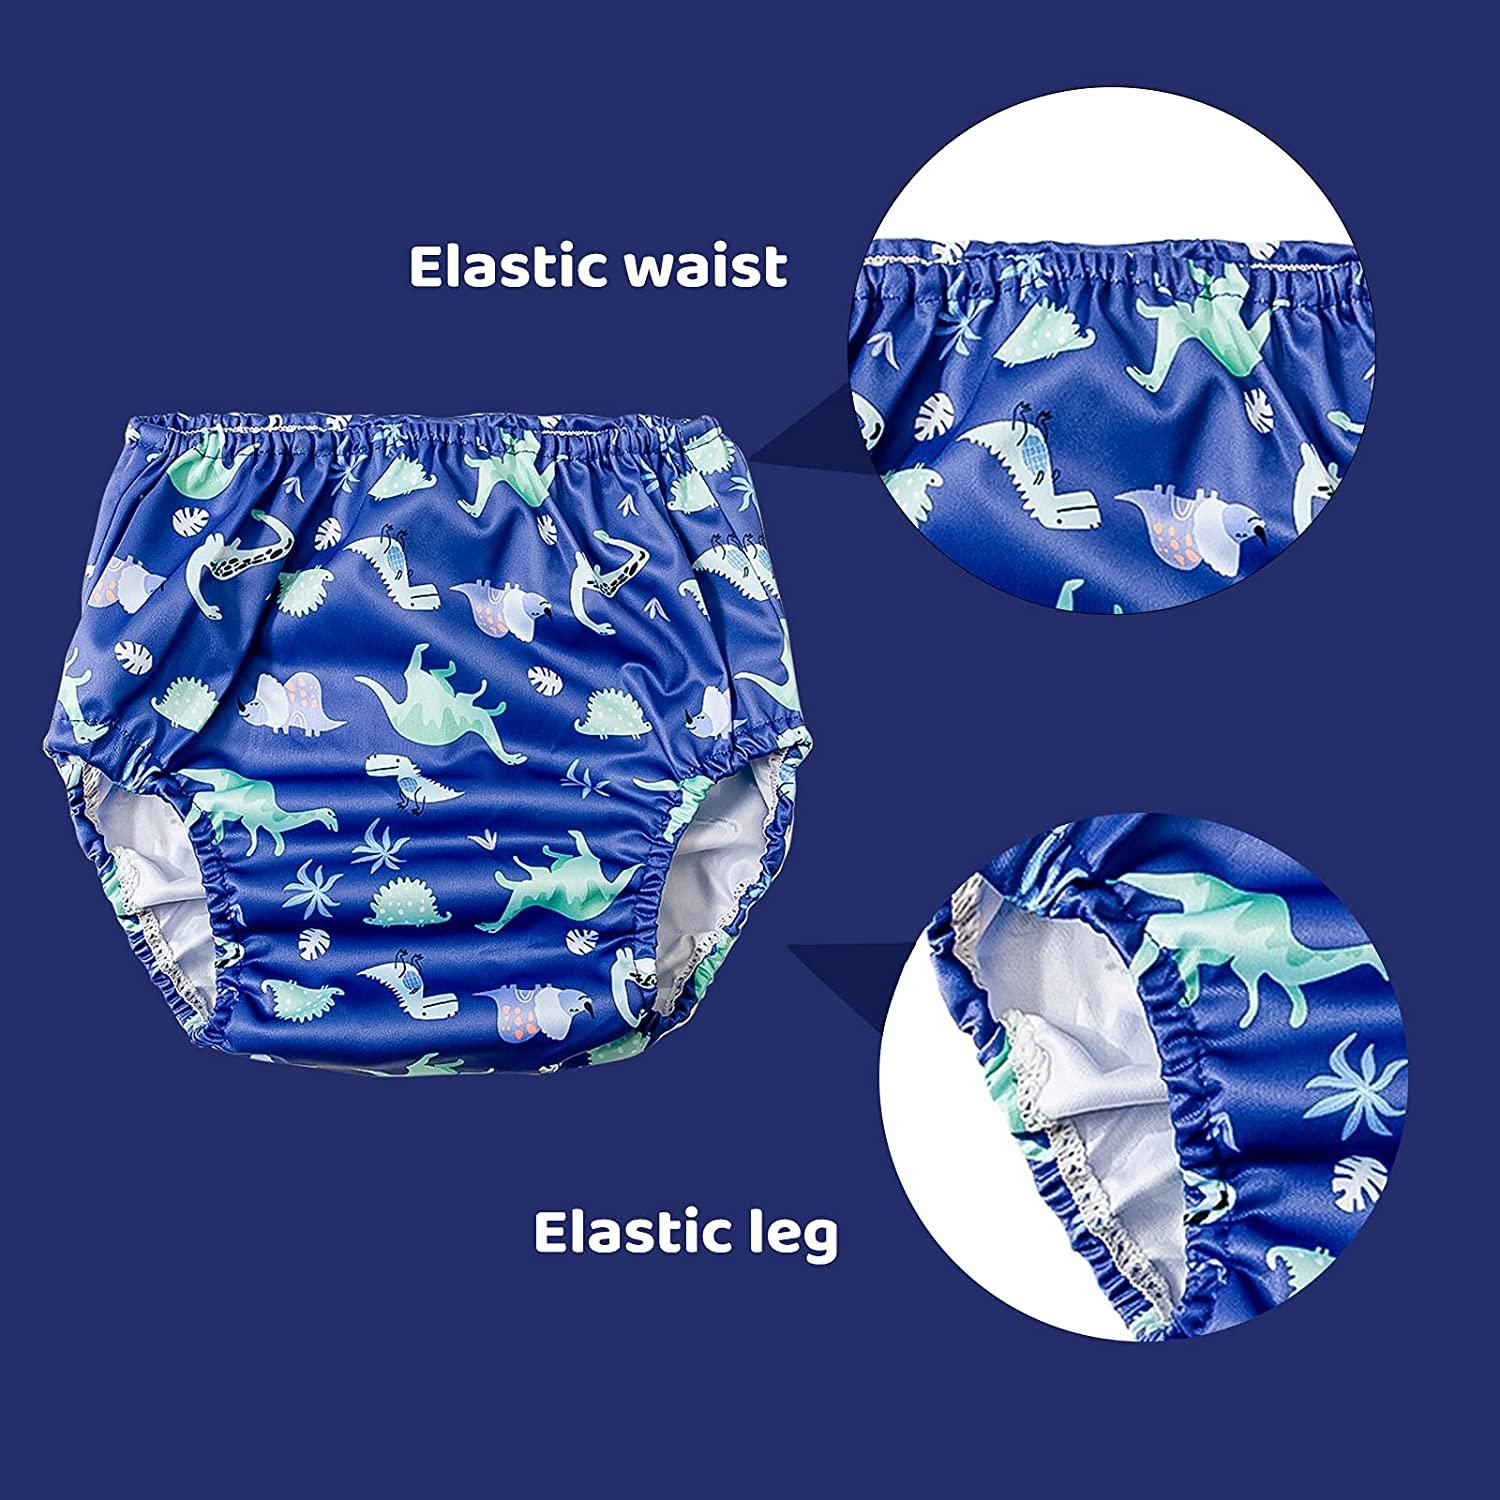 BISENKID Waterproof Diaper Cover for Rubber Pants for Toddlers Good Elastic  Rubber Swim Diaper Cover for Potty Training Underwear Boy 3t 3T (4 Count)  Boys